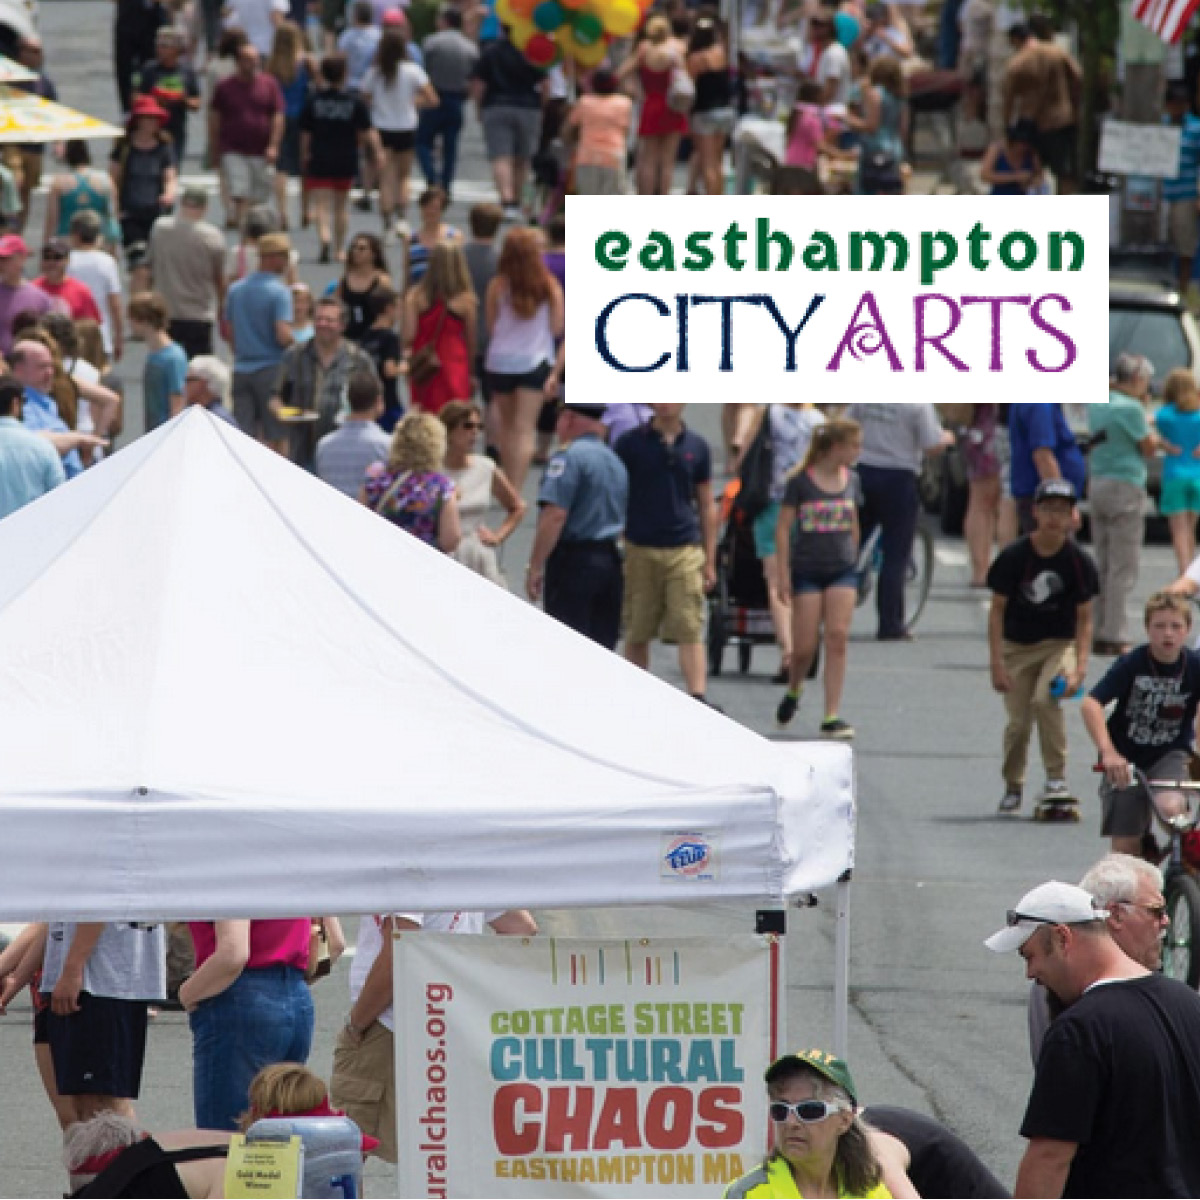 Easthampton City Arts logo for the Cultural Chaos street festival.